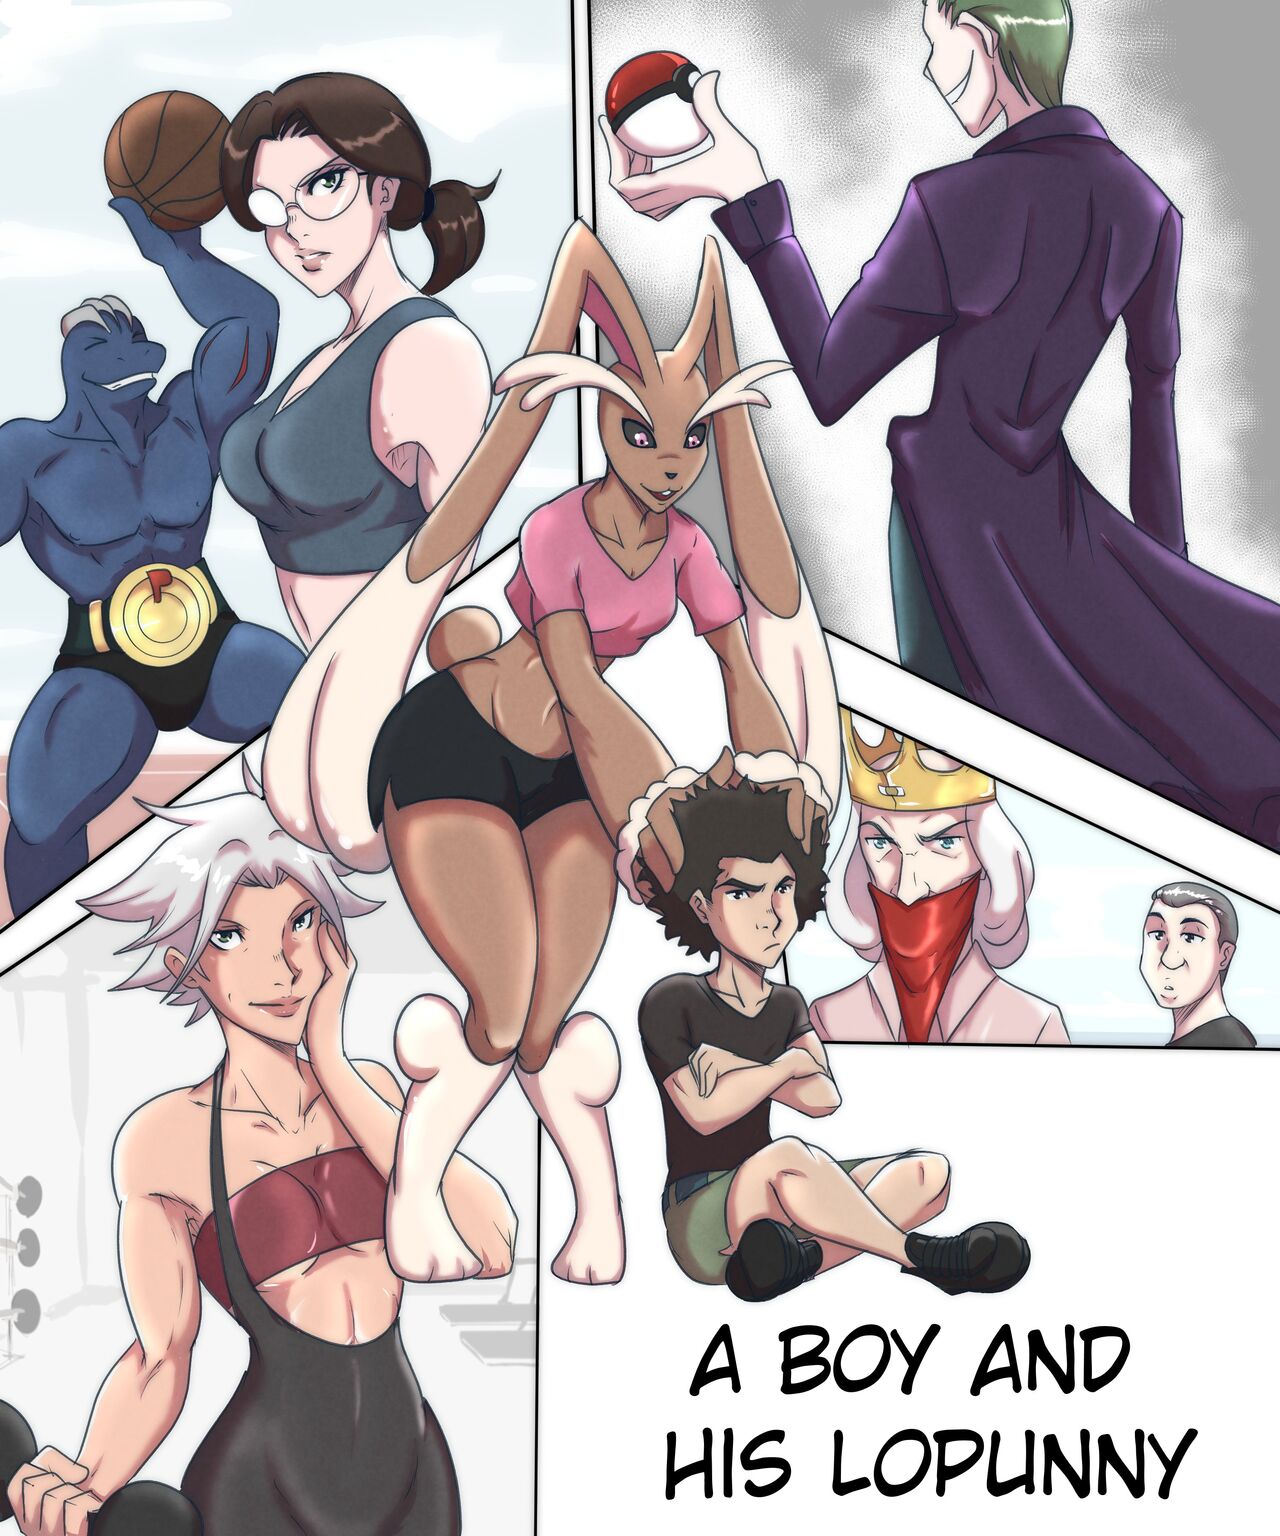 Wesley Pires - Pokemon Scarlet and Violet - A Boy and his Lopunny